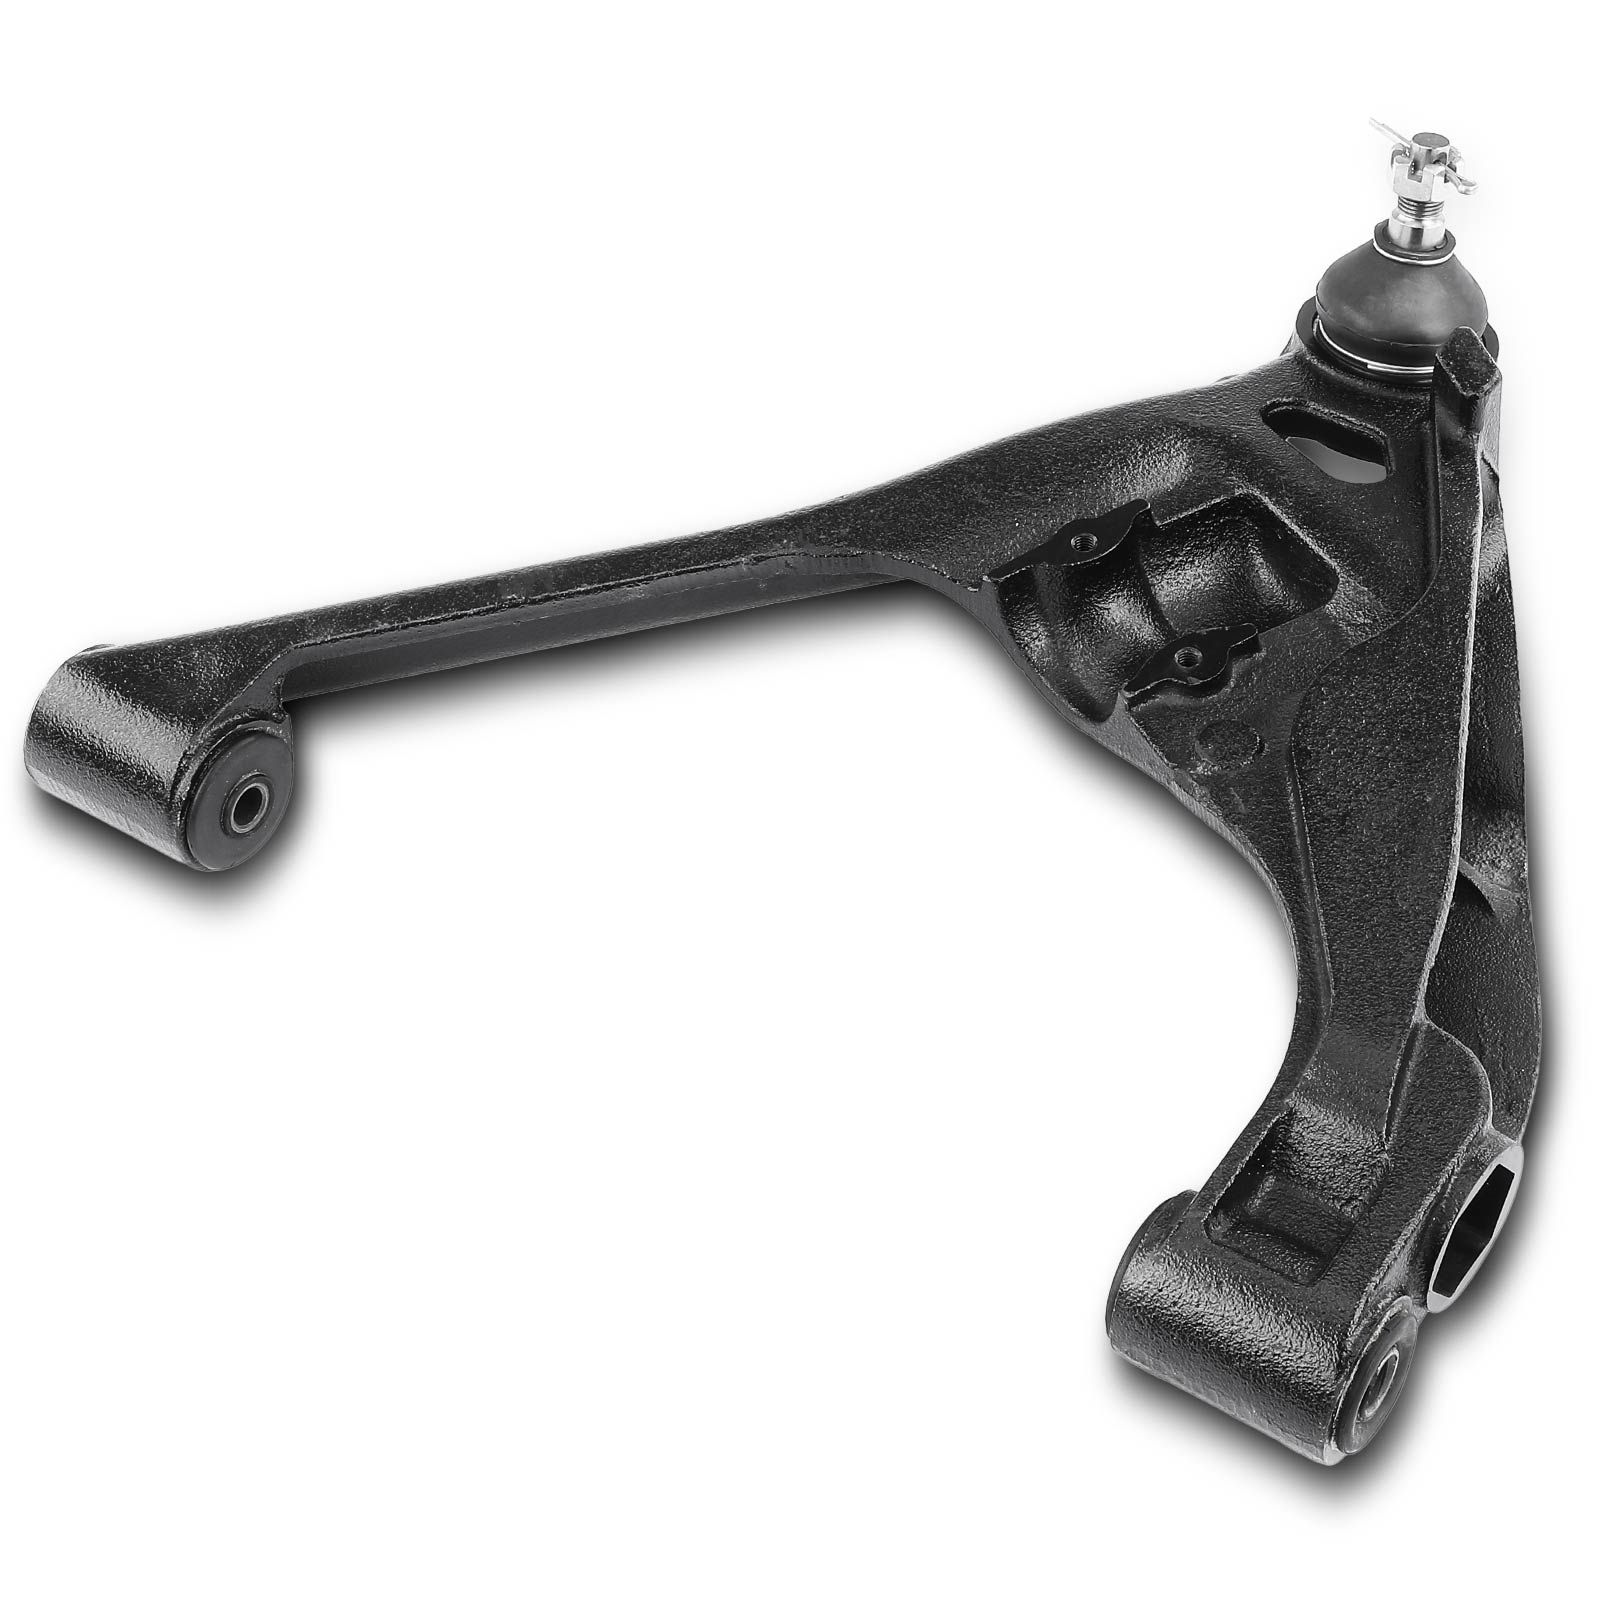 Front Left Lower Control Arm with Ball Joint for Dodge Dakota 2000-2004 Durango